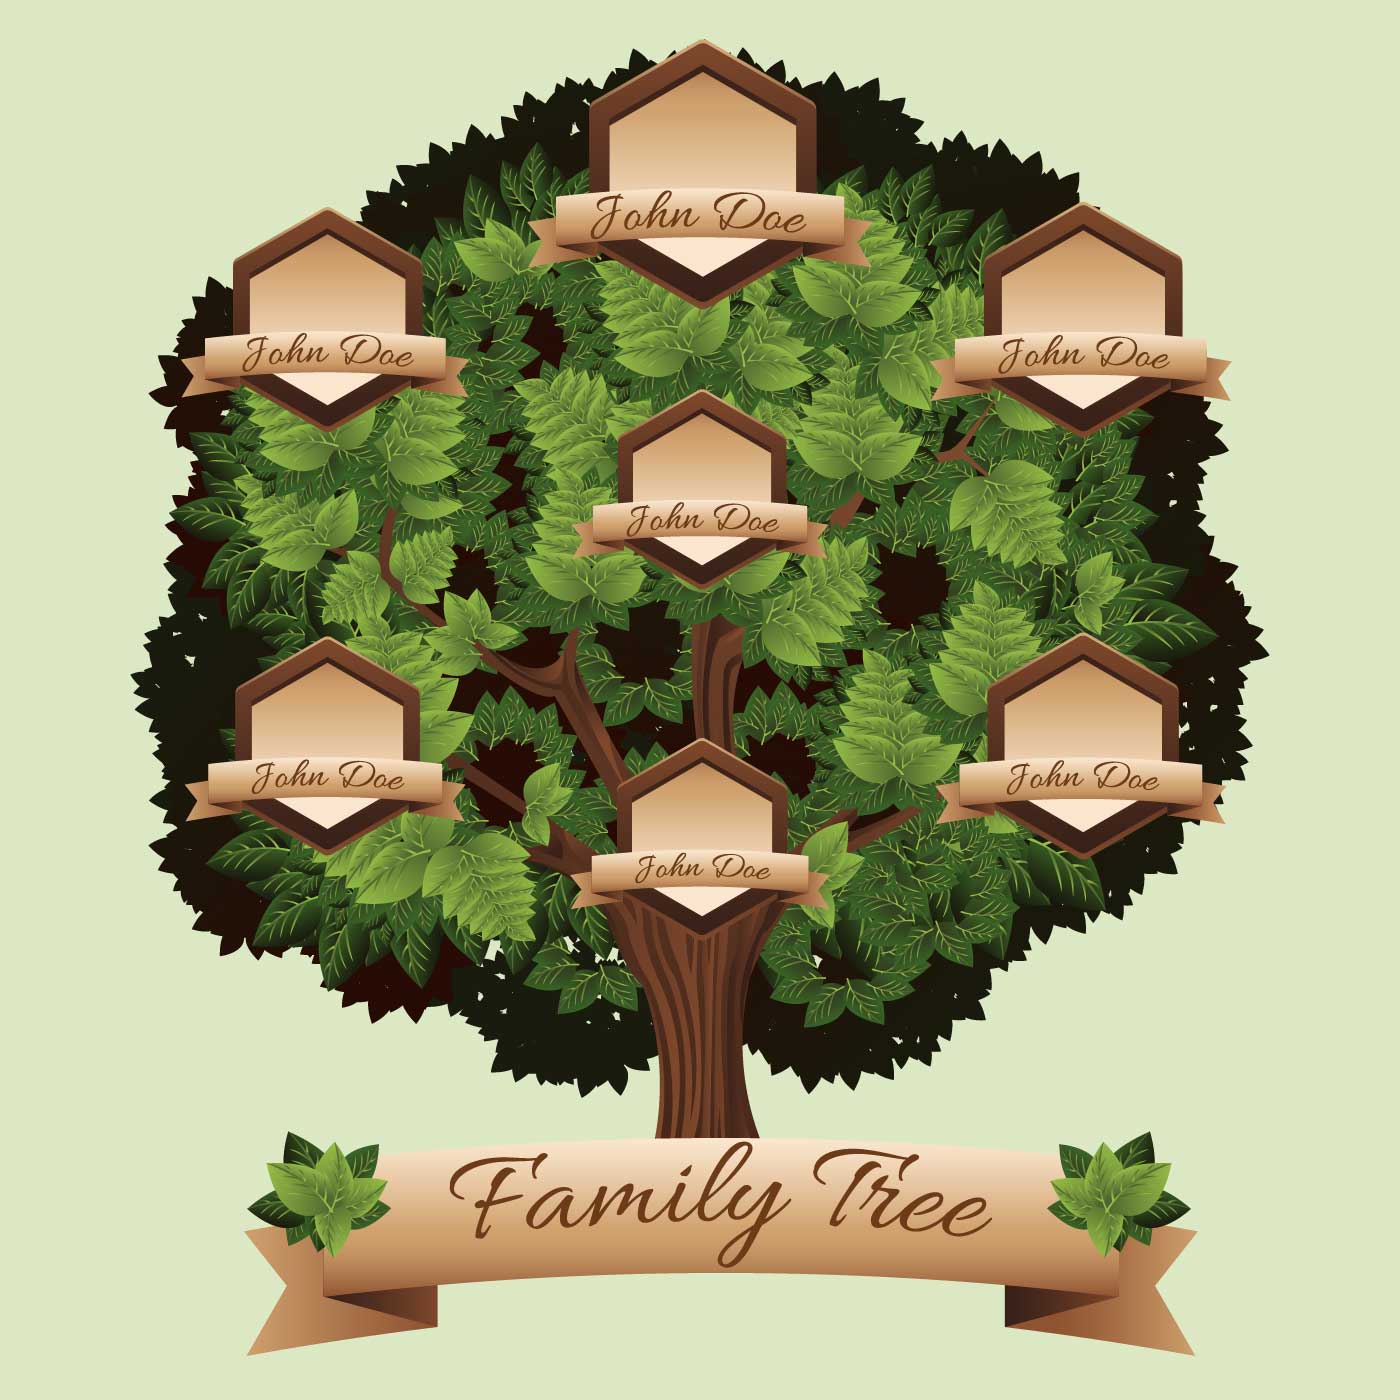 family tree Download Free Vectors, Clipart Graphics